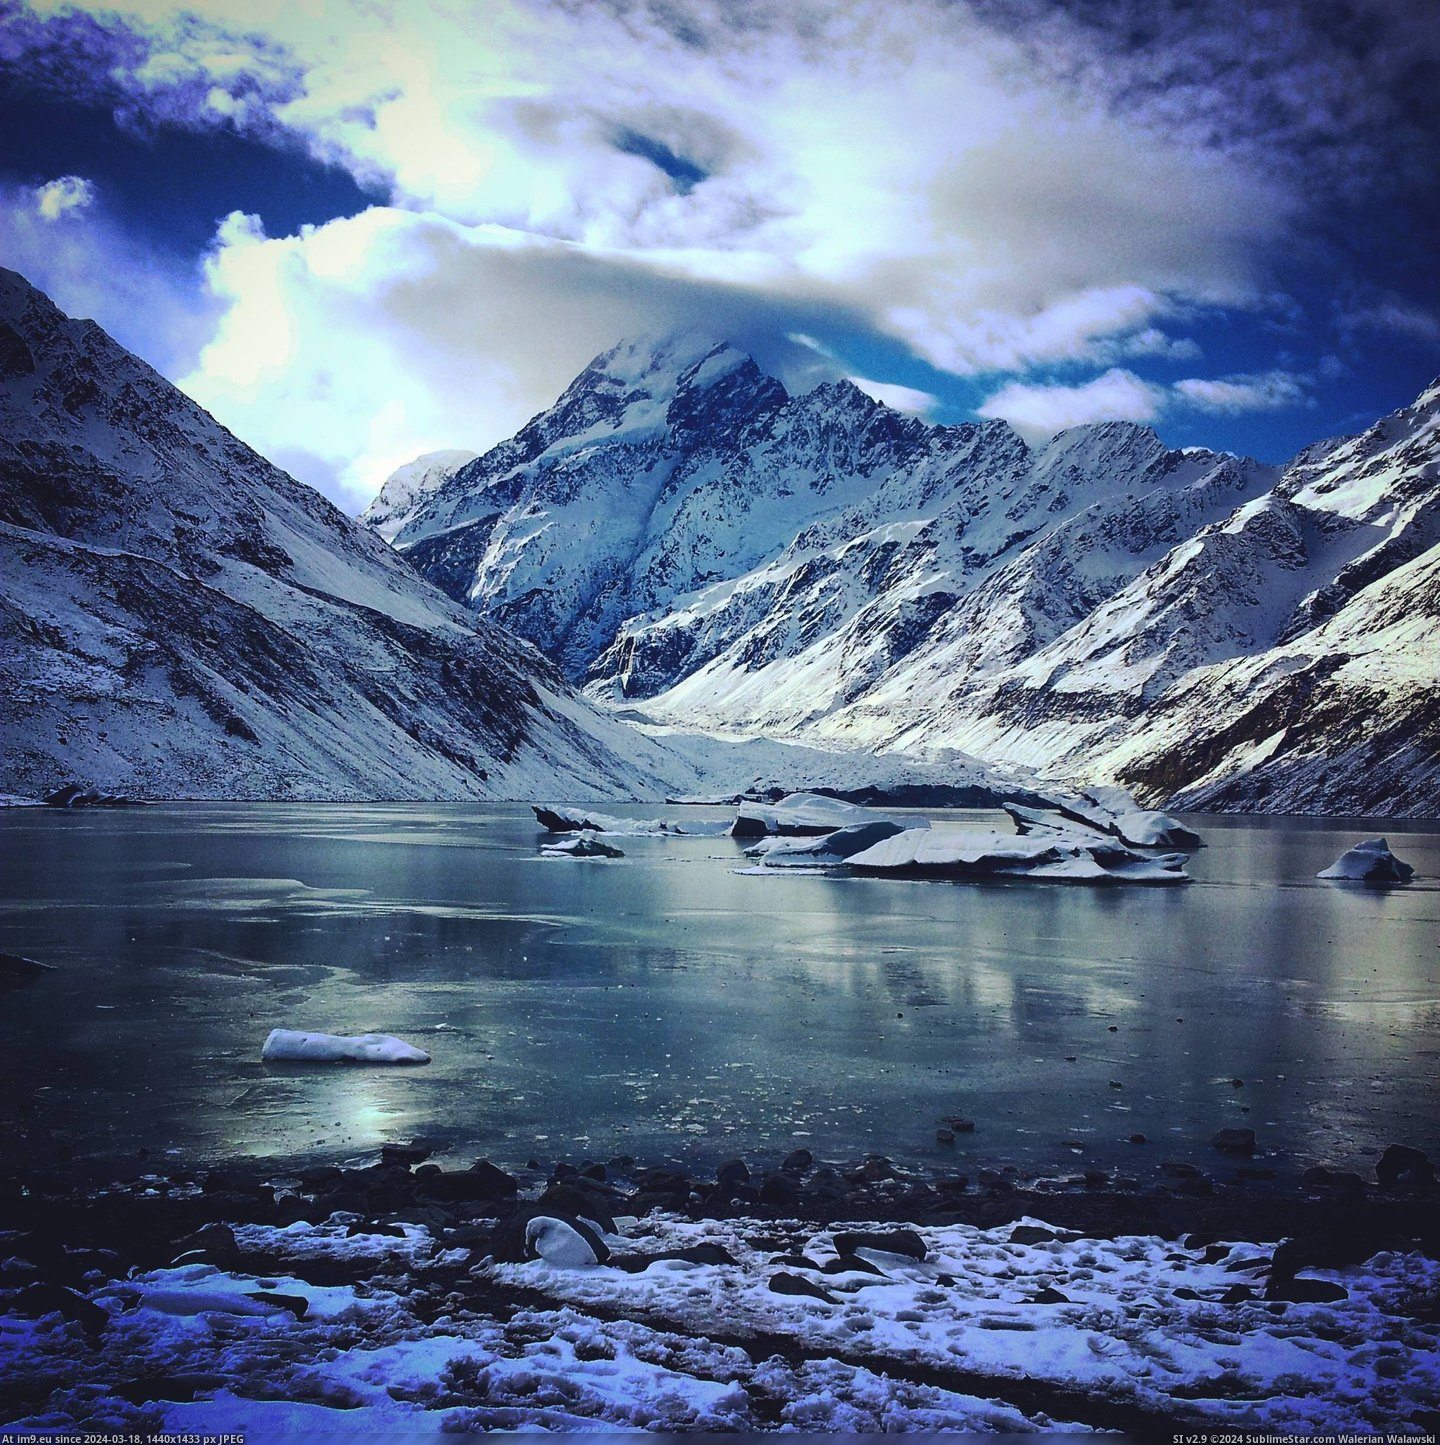 #Hooker #Lake #End #Frozen #Track #Cook #Valley #Mount #Zealand [Earthporn] The frozen lake at the end of the Hooker Valley track, Mount Cook, New Zealand [2448x2448px] Pic. (Image of album My r/EARTHPORN favs))